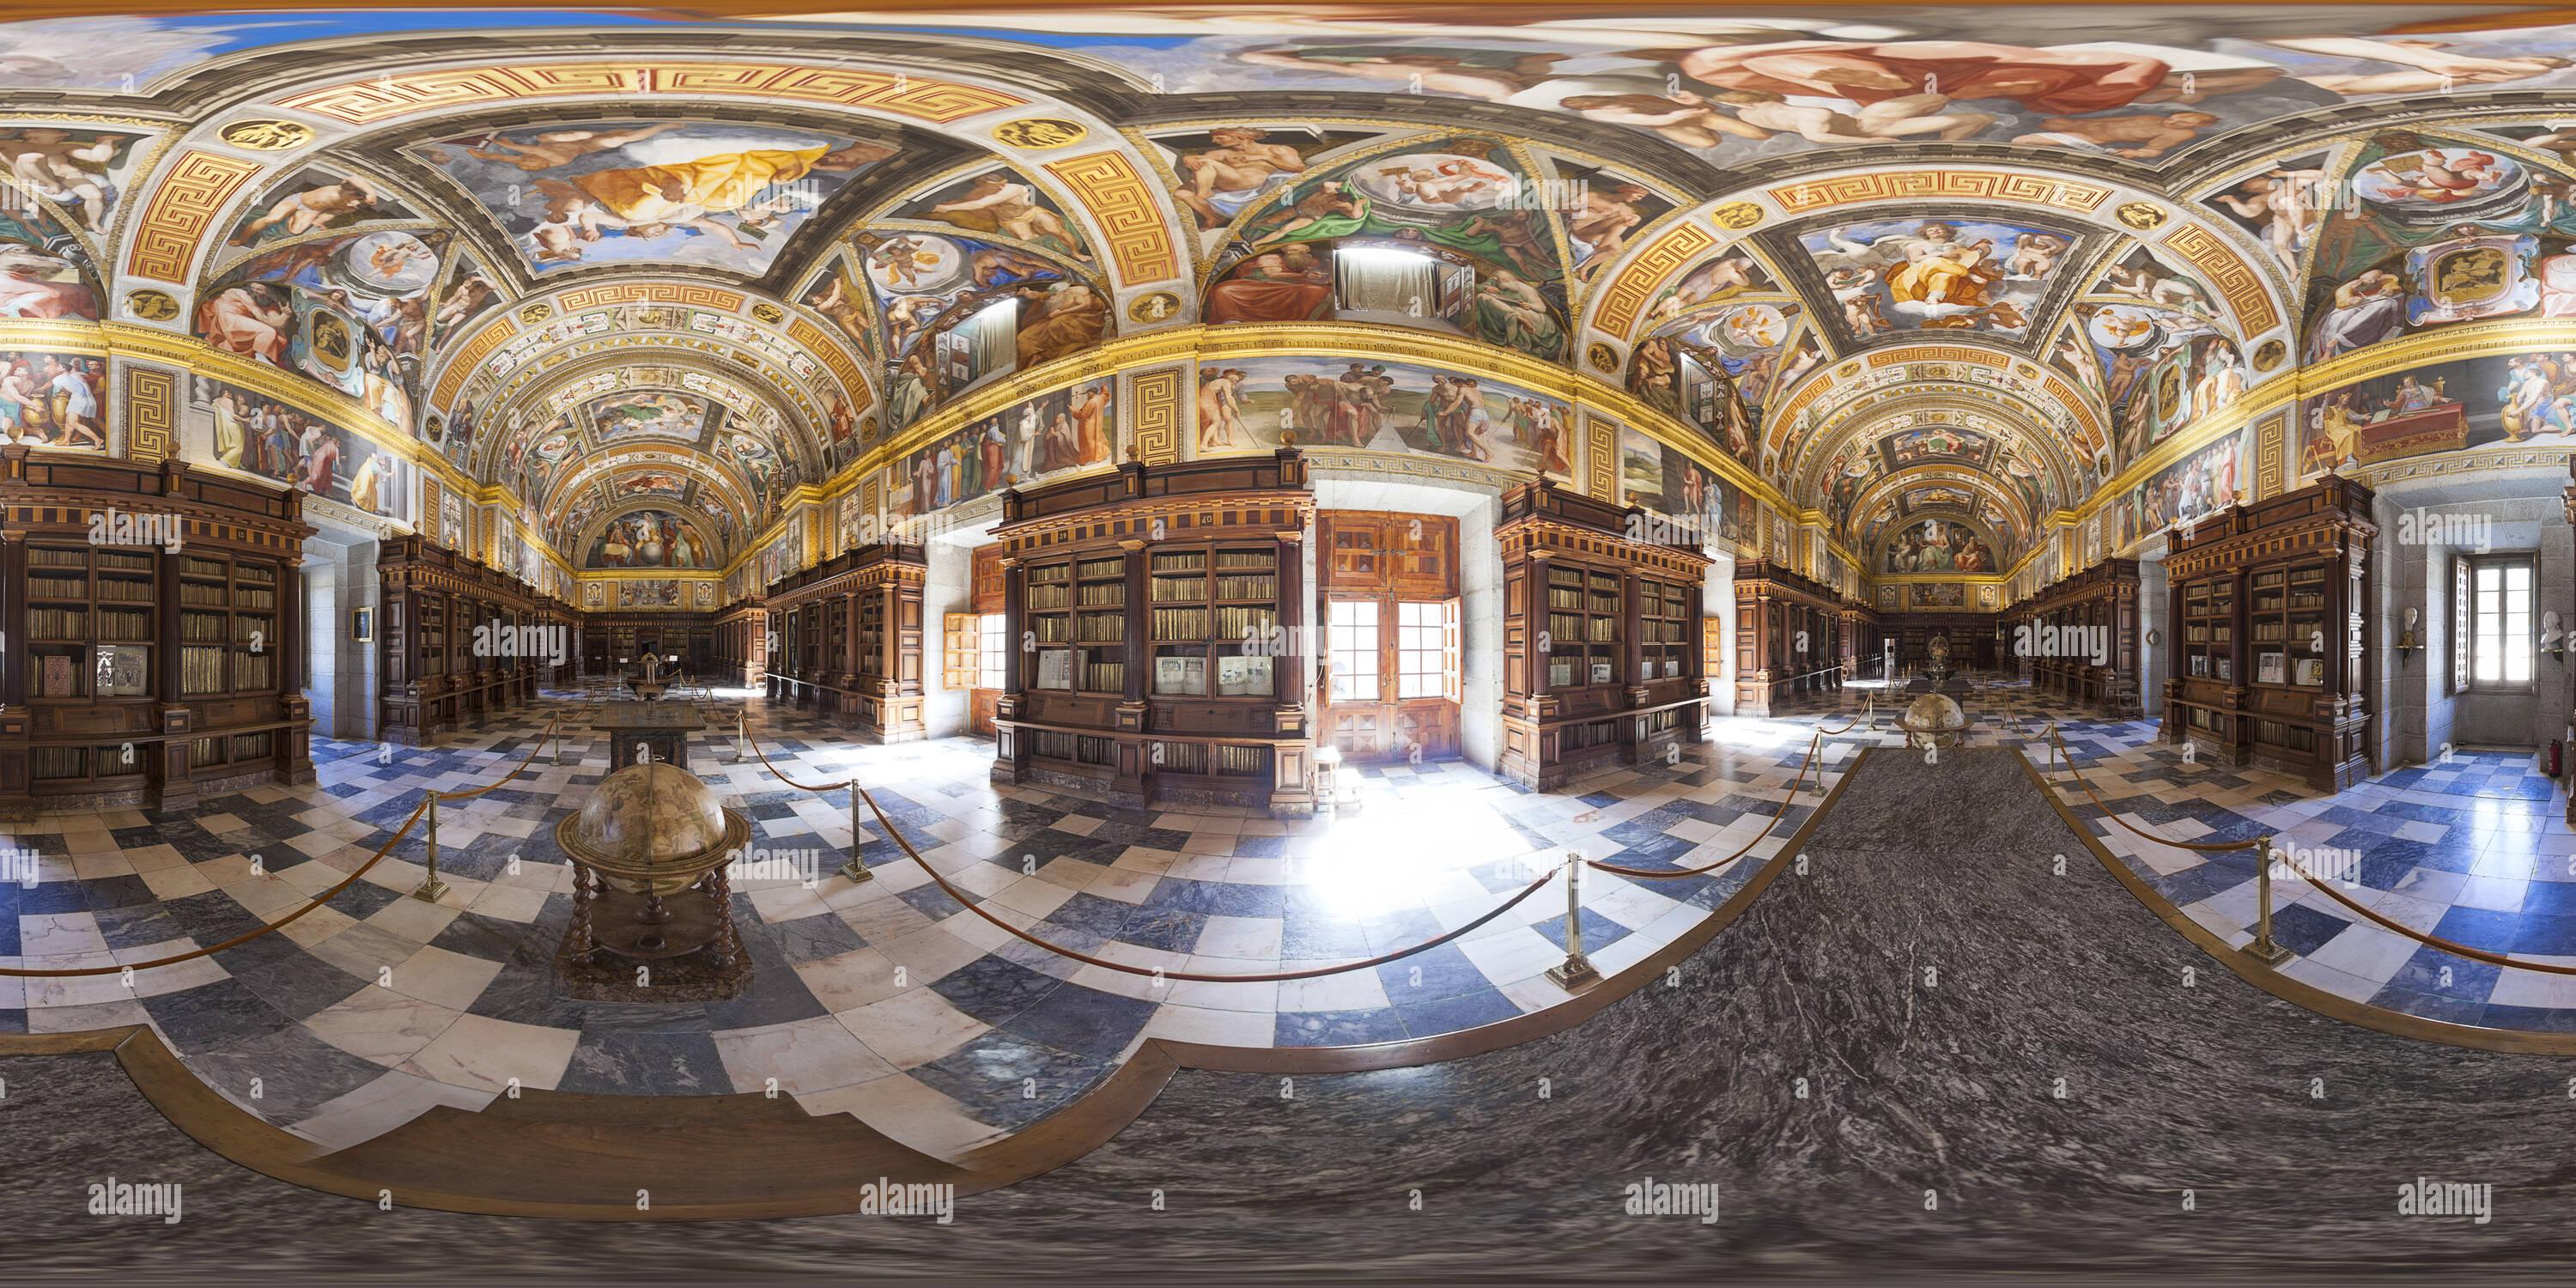 Image Archive: 360 Panorama